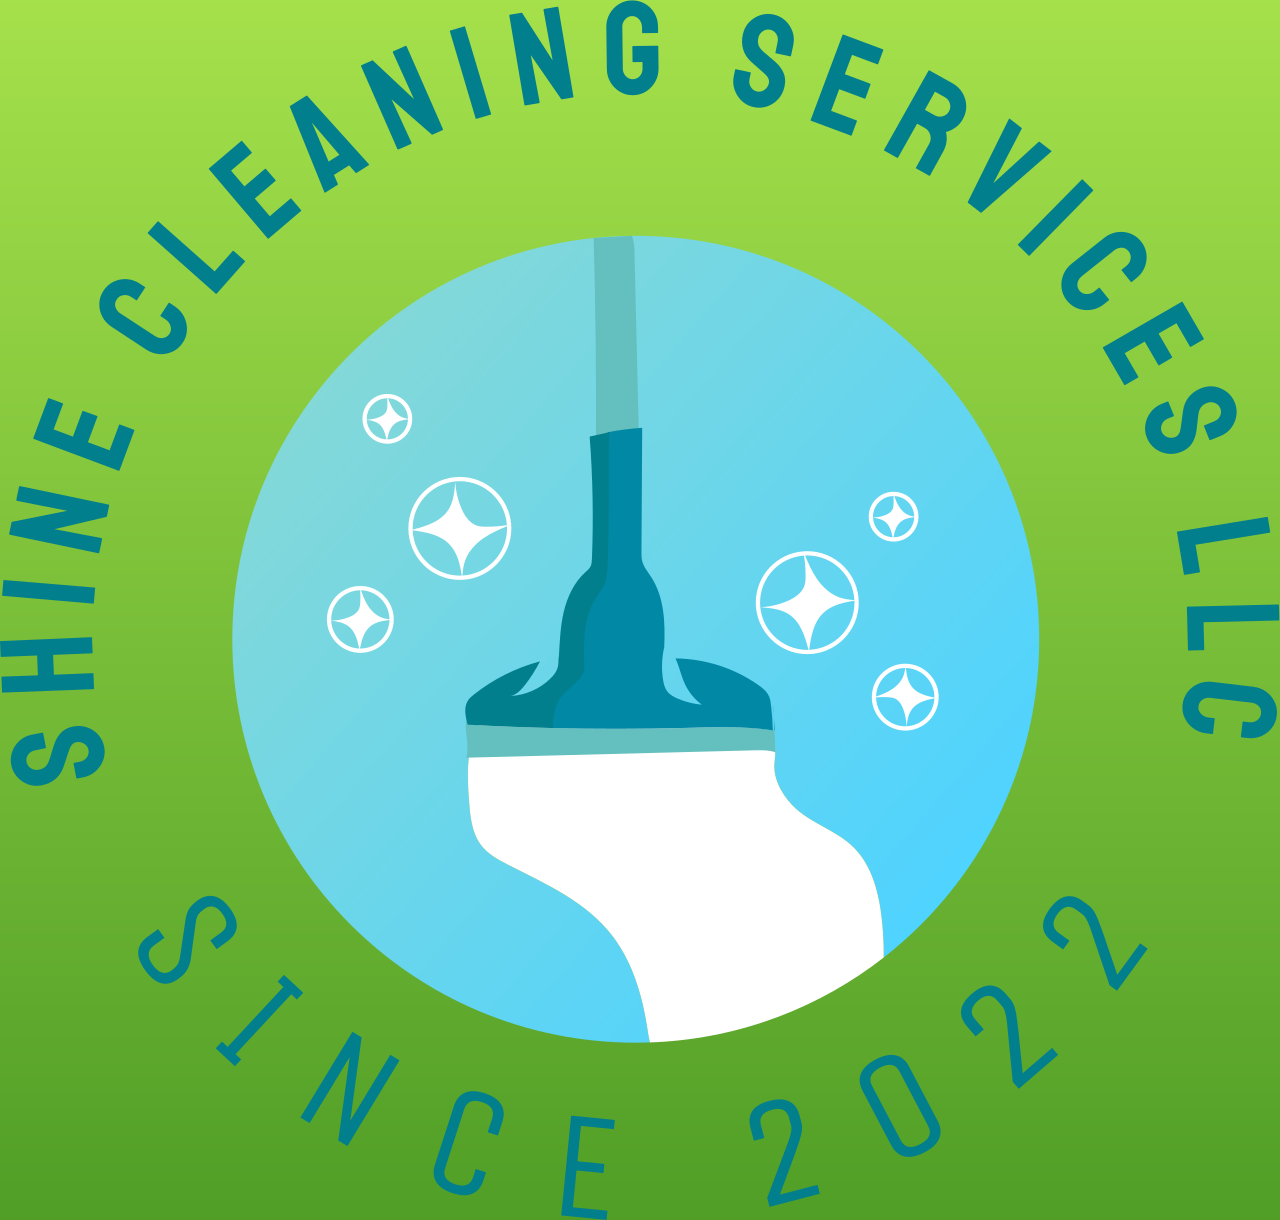 Shine Cleaning Services LLC 's logo